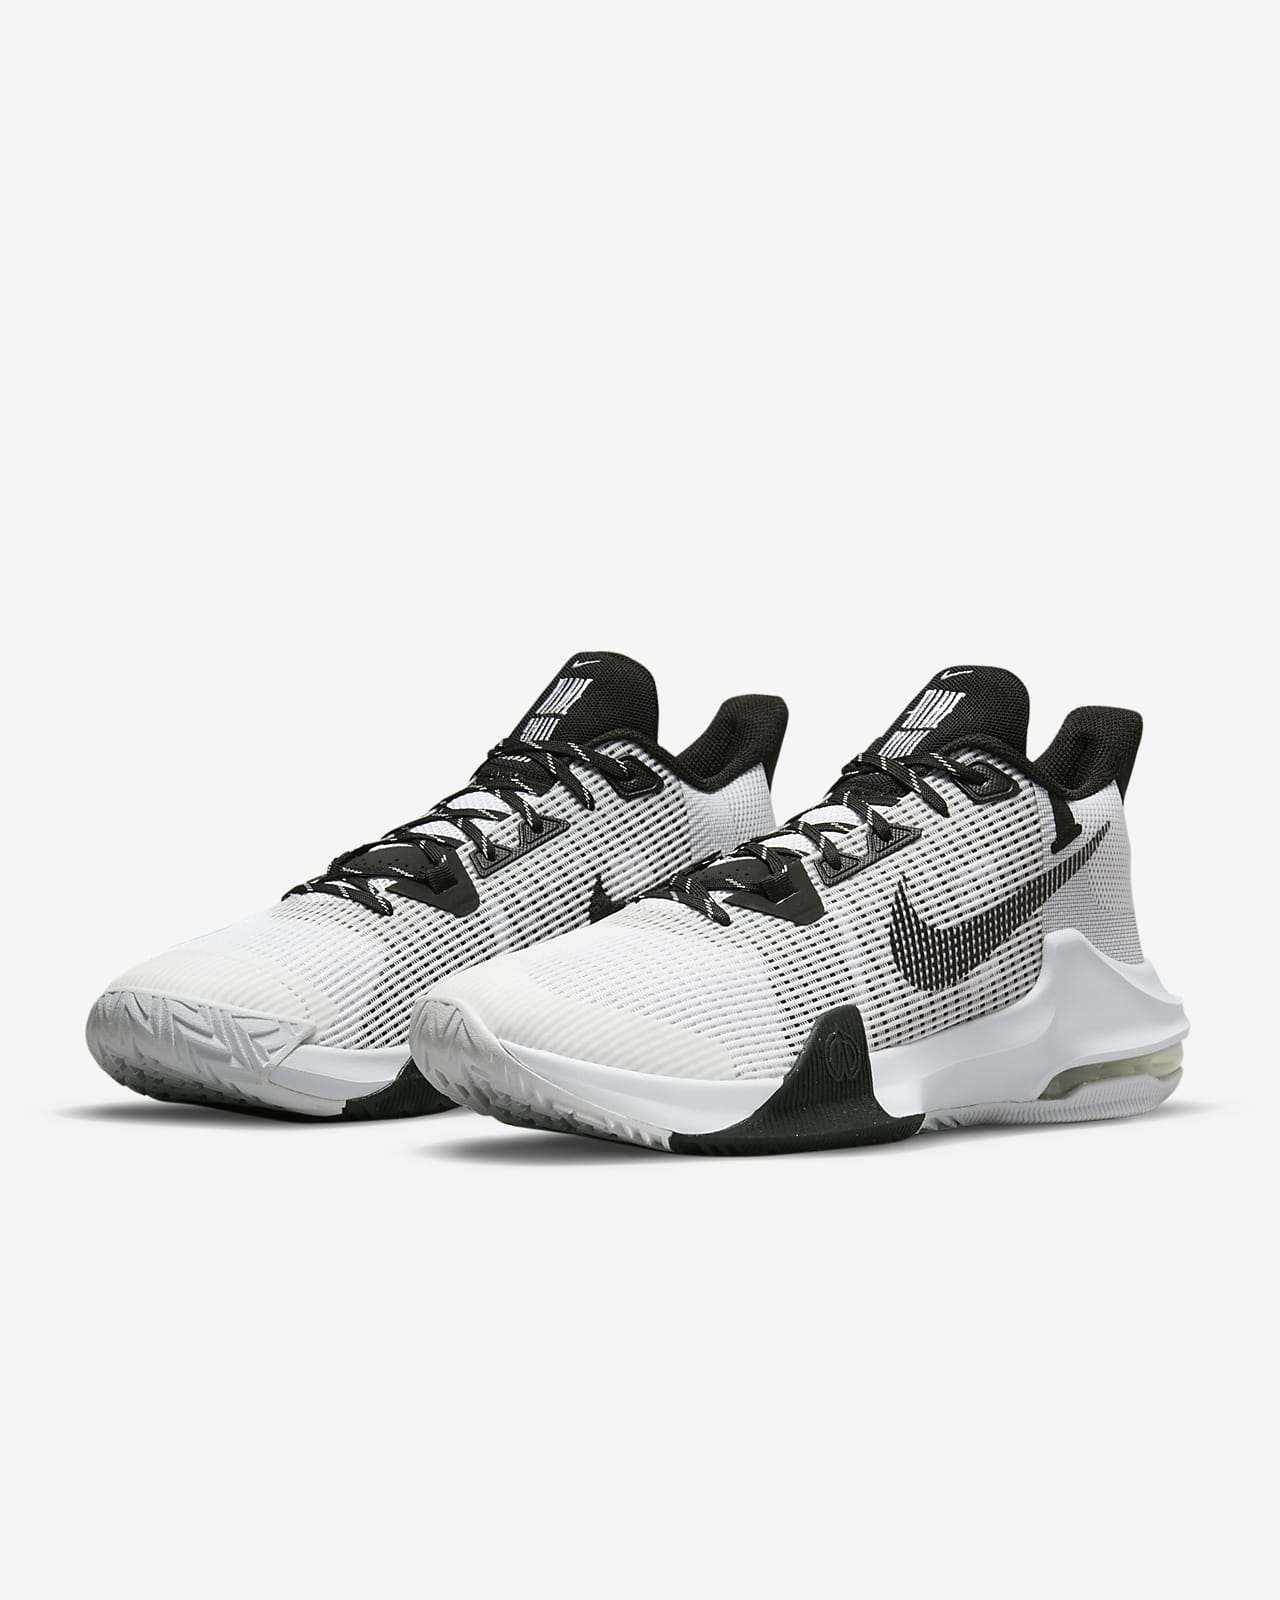 nike air max basketball shoes price